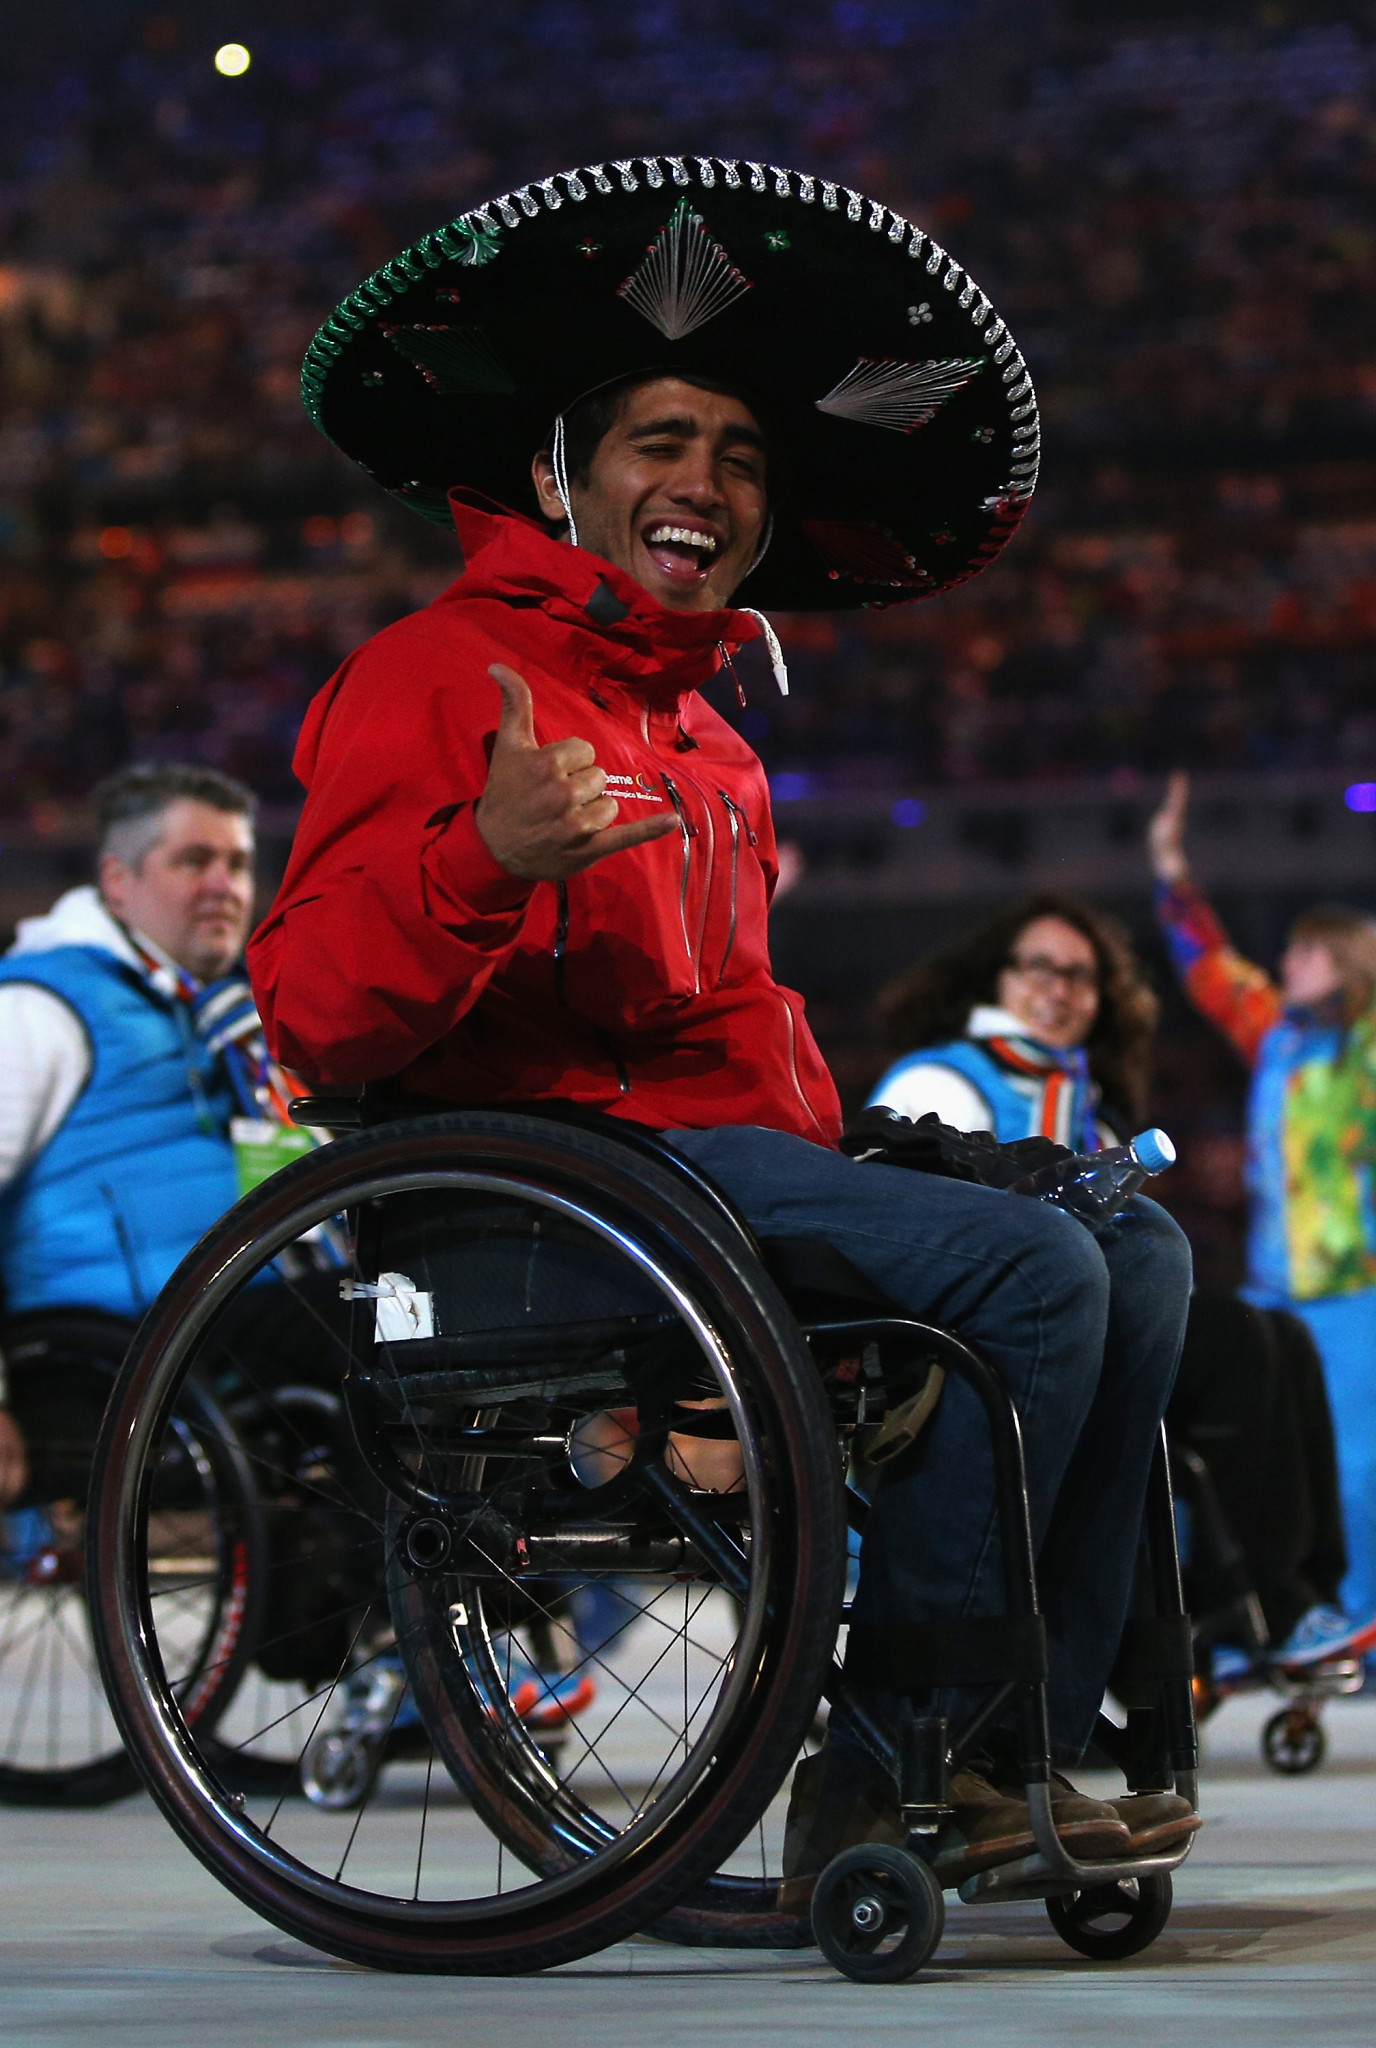 Arly Velasquez is one of 25 people who the IPC has chosen to video blog the upcoming Games  ©Getty Images